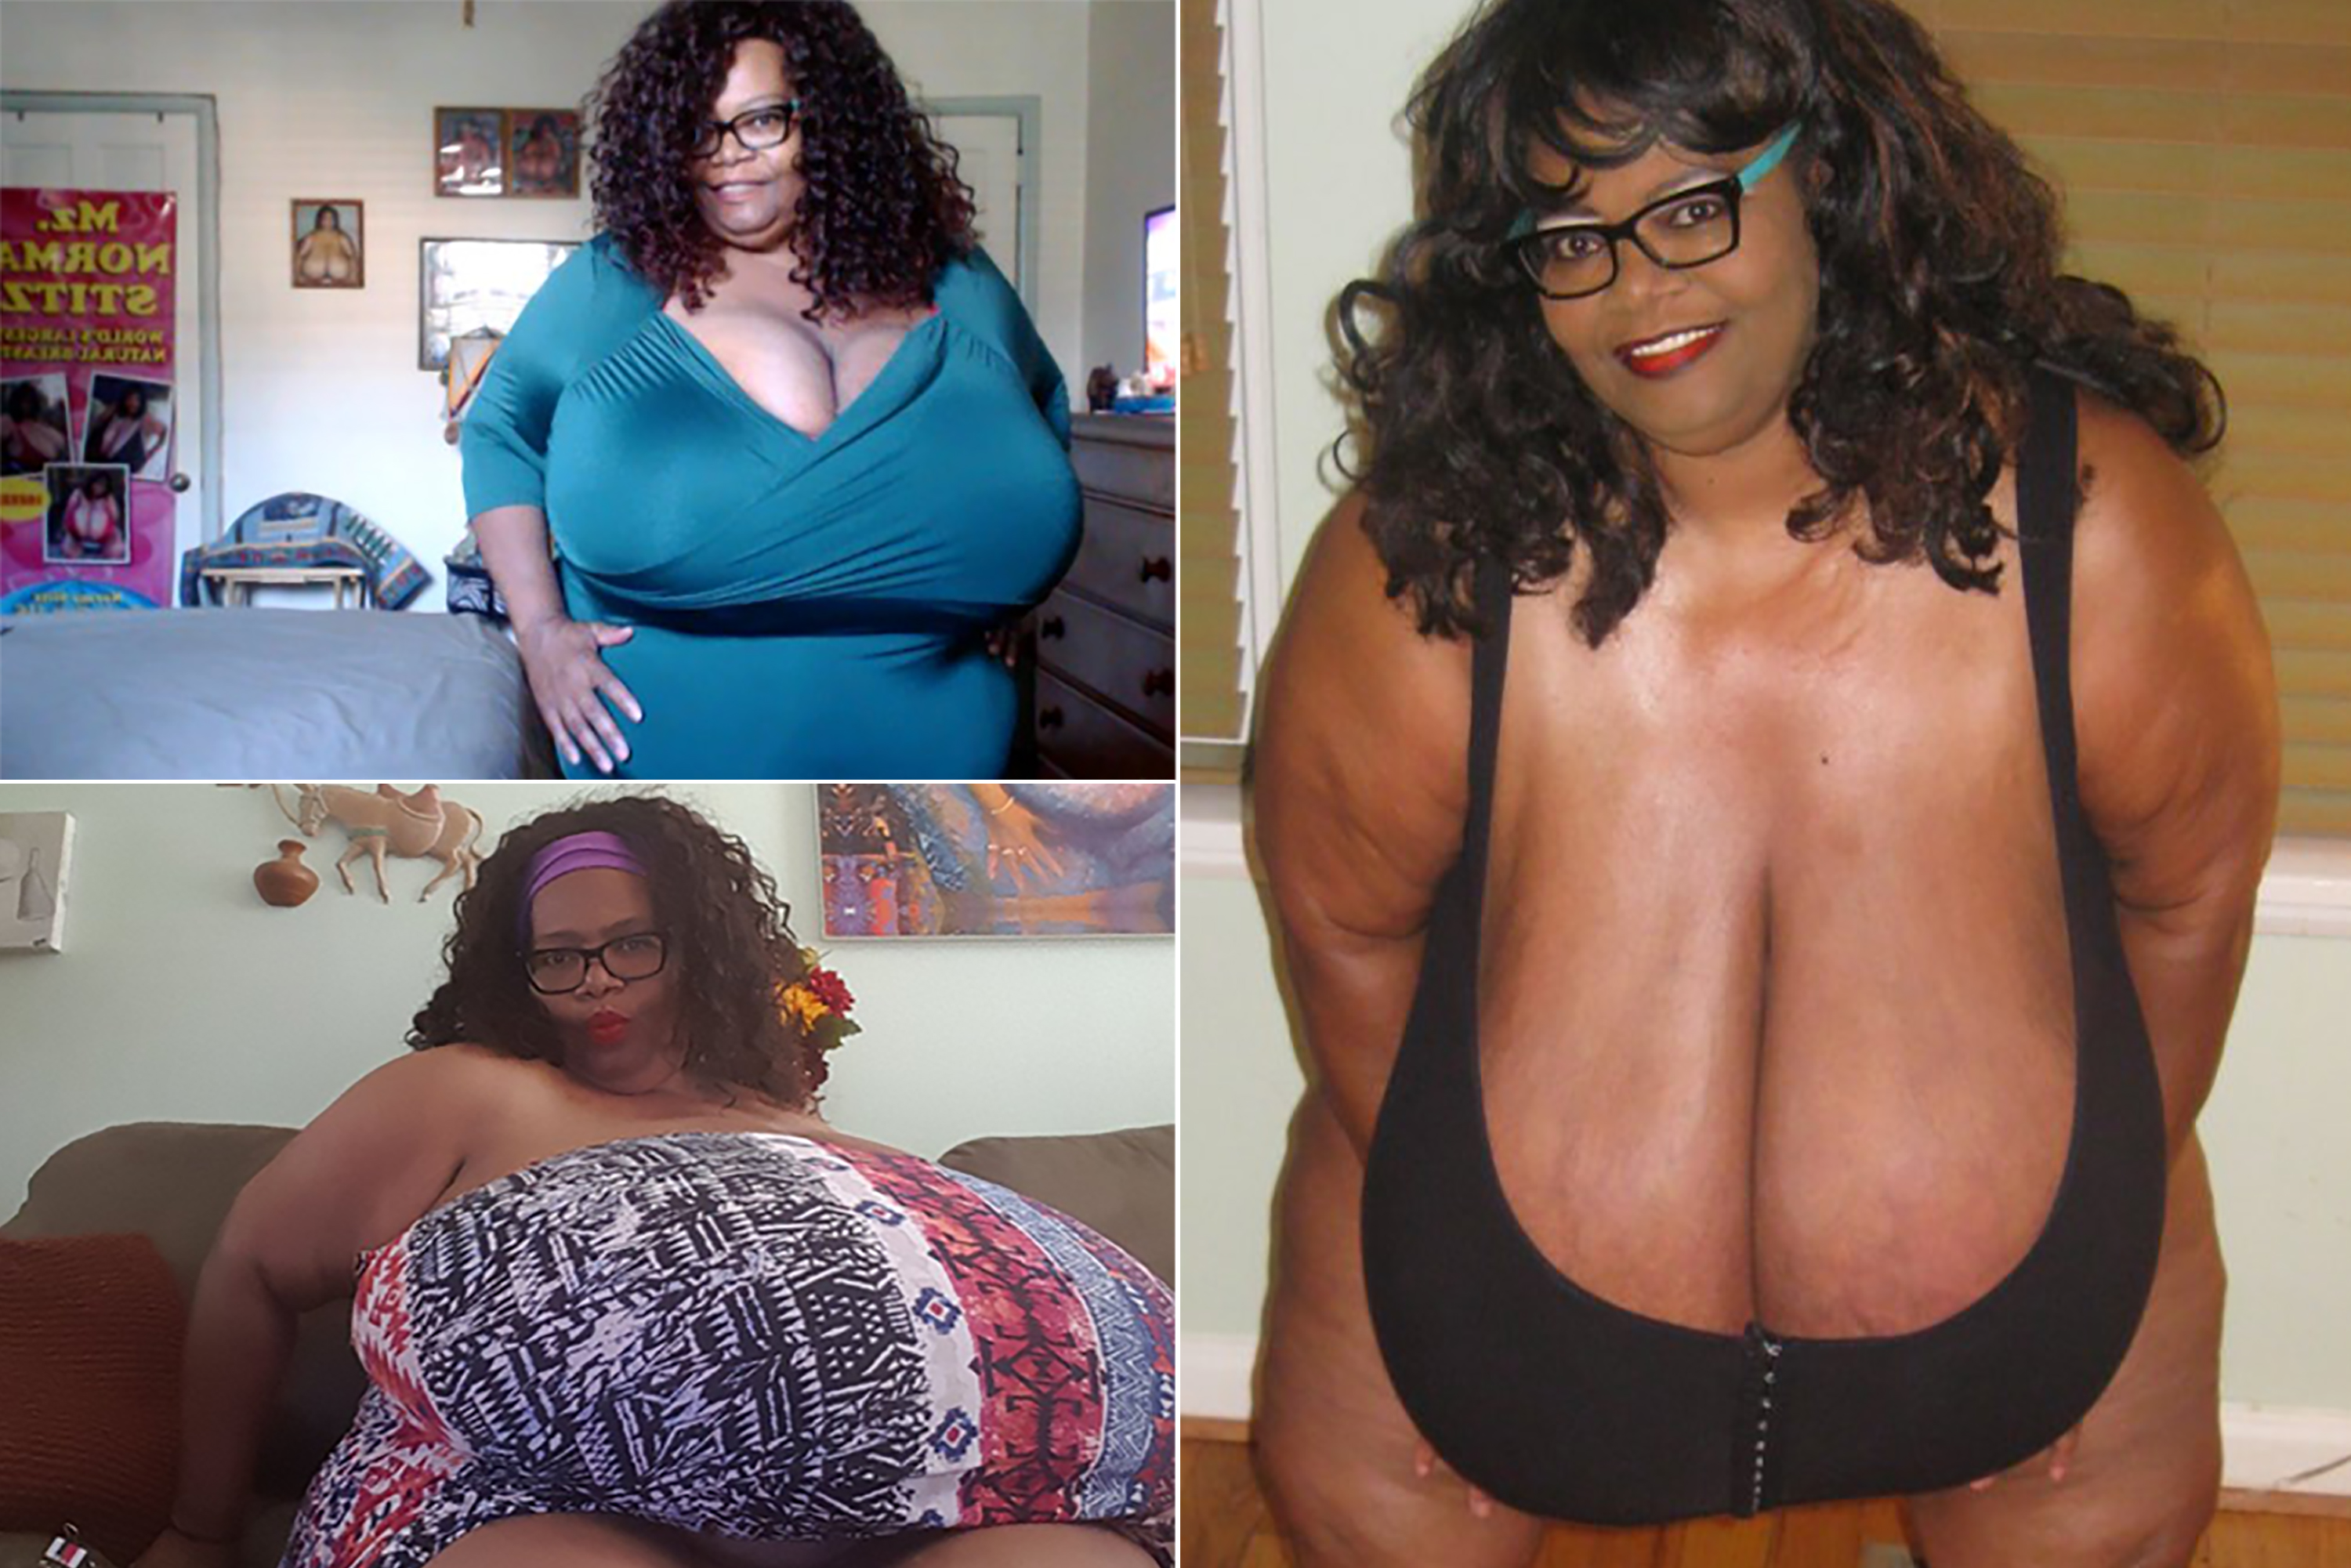 ahmed miah share the biggest tits ever photos